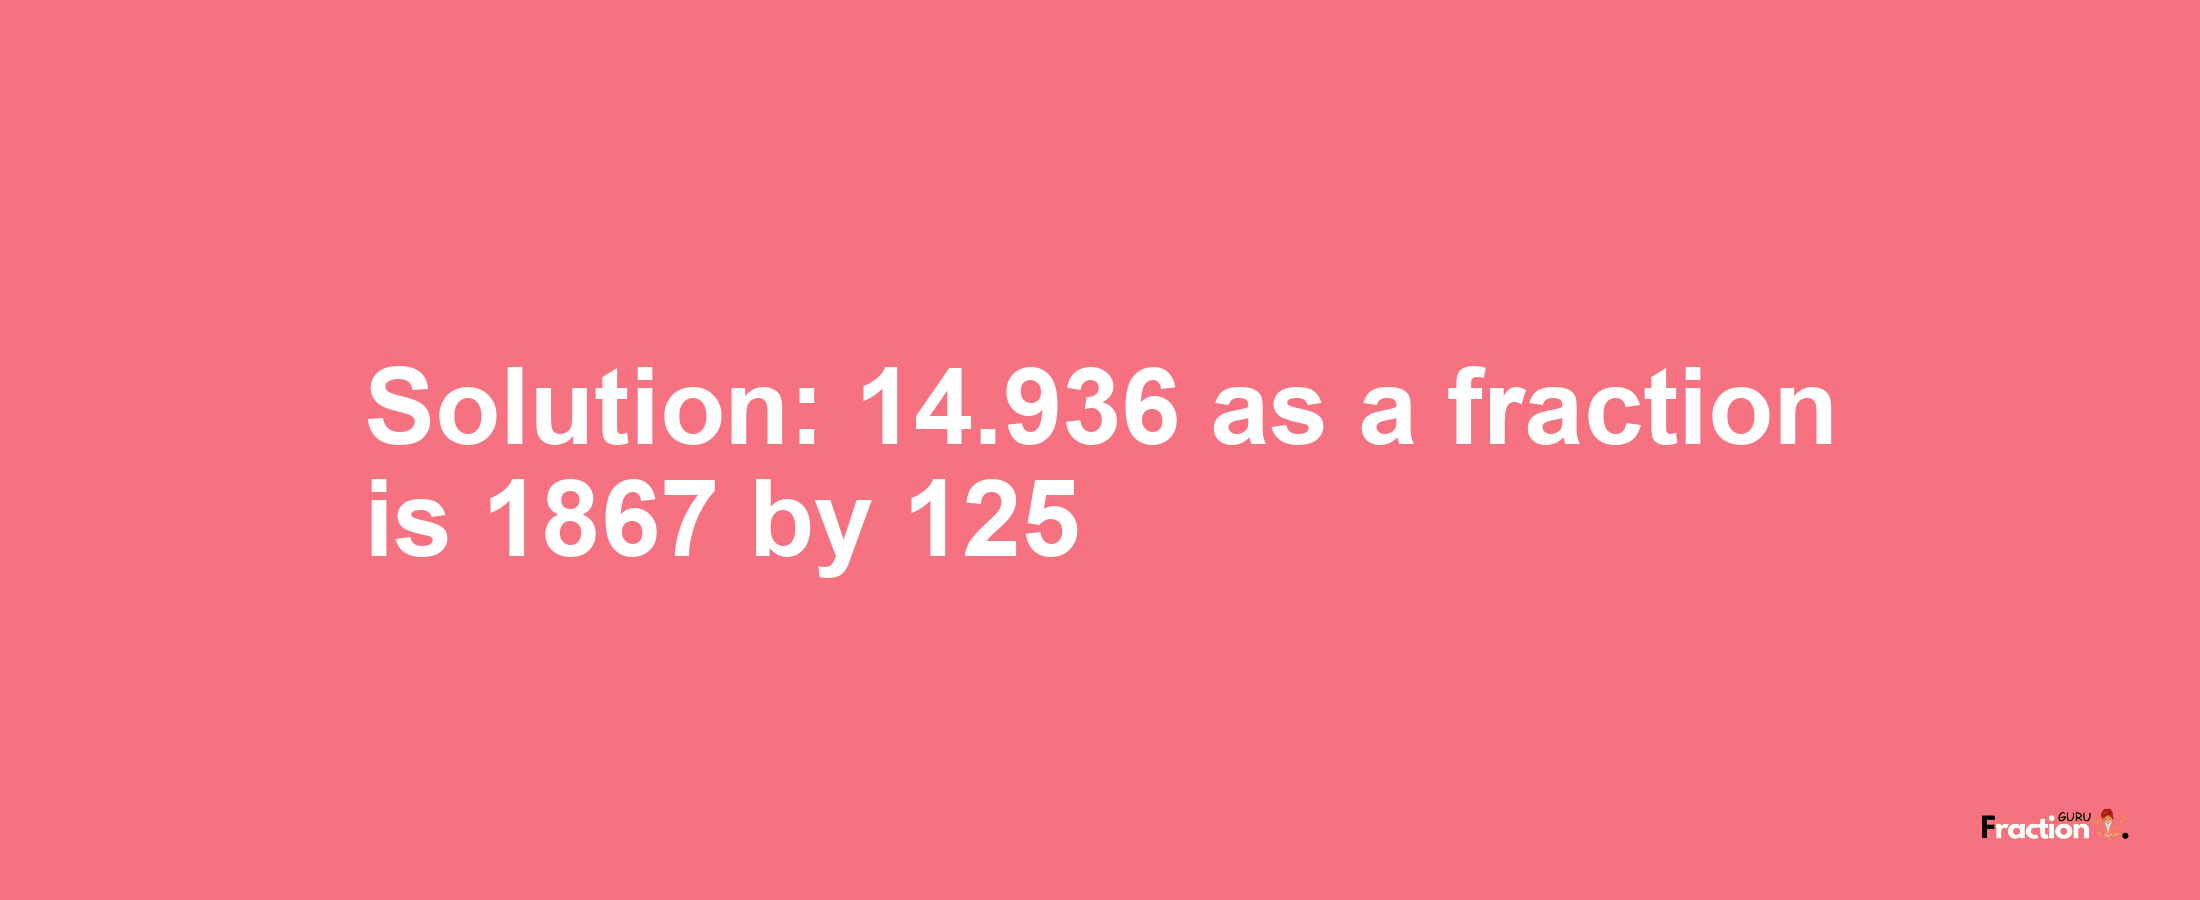 Solution:14.936 as a fraction is 1867/125